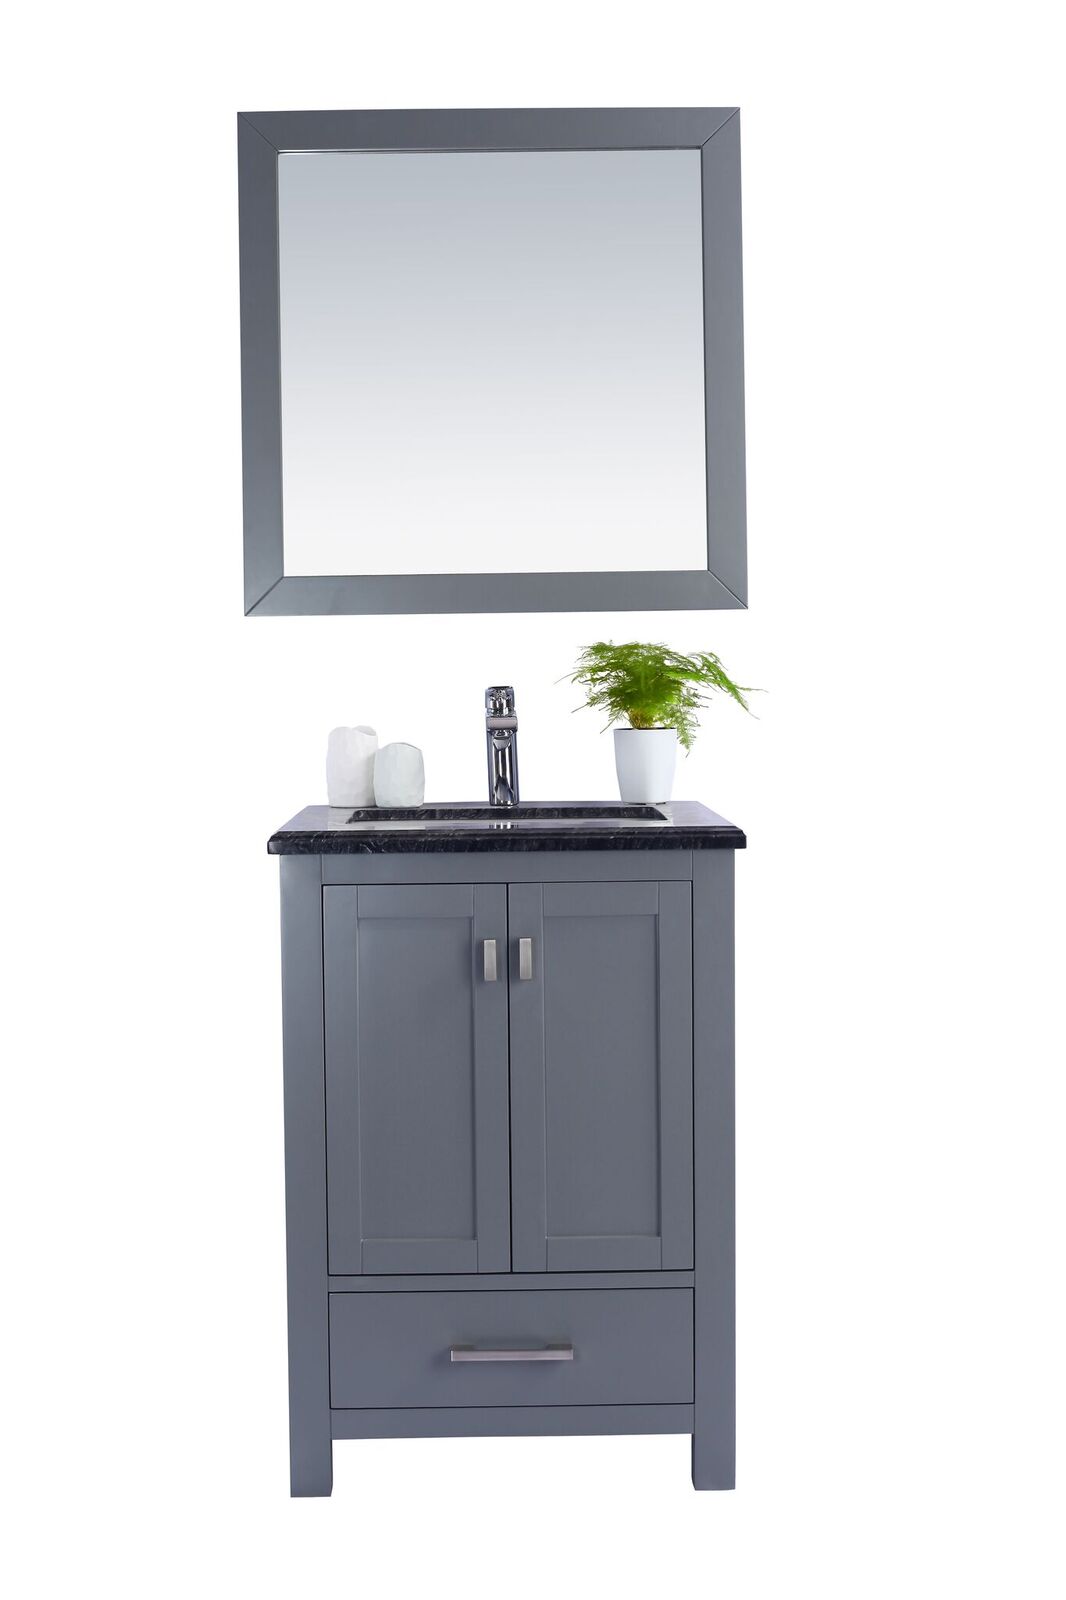 24" Single Sink Bathroom Vanity Cabinet + Top and Color Options